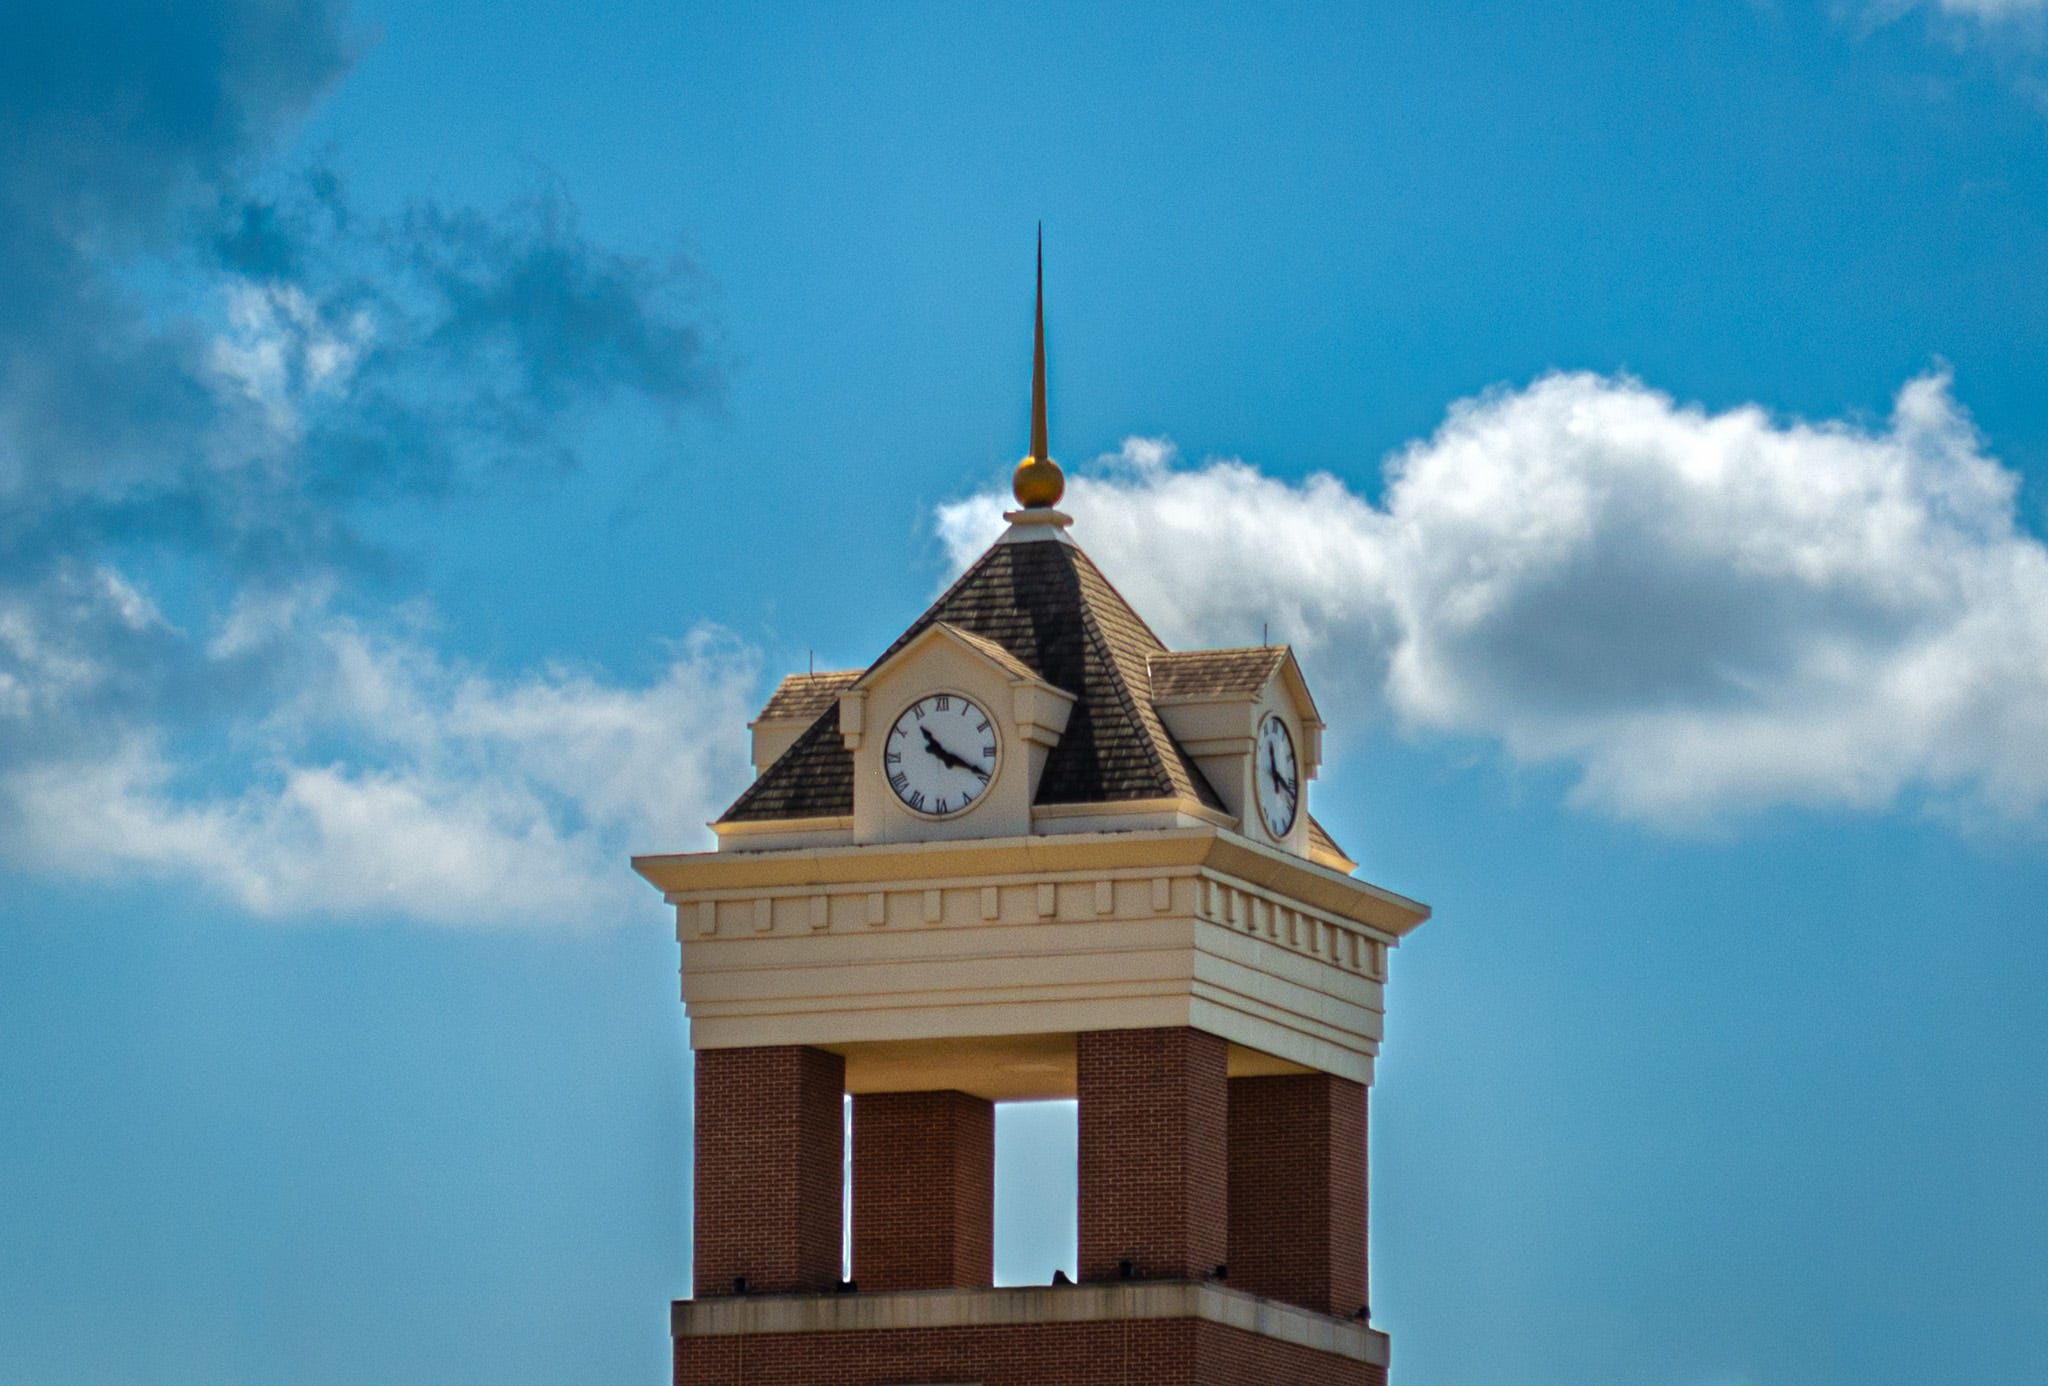 A clock tower showing the time, 11:20 am, against a blue sky with scattered white and grey clouds in the background